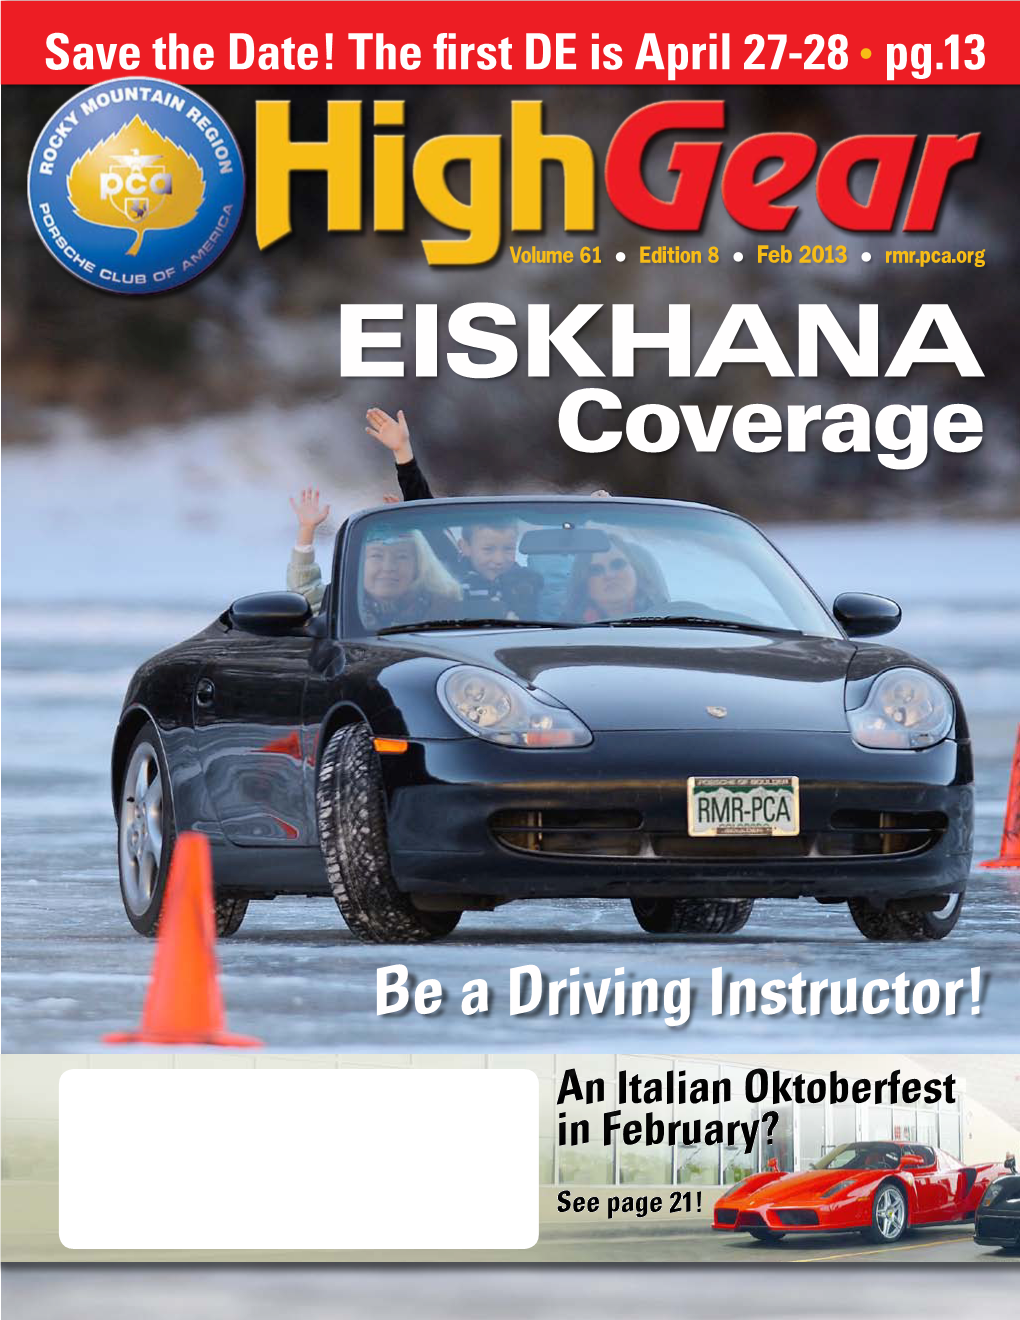 High Gear (ISSN1061-1746) Is the Official Magazine of the Rocky • 2,461 Square Feet Necessary by the Bumpy, Dirt Road I Drive Everyday